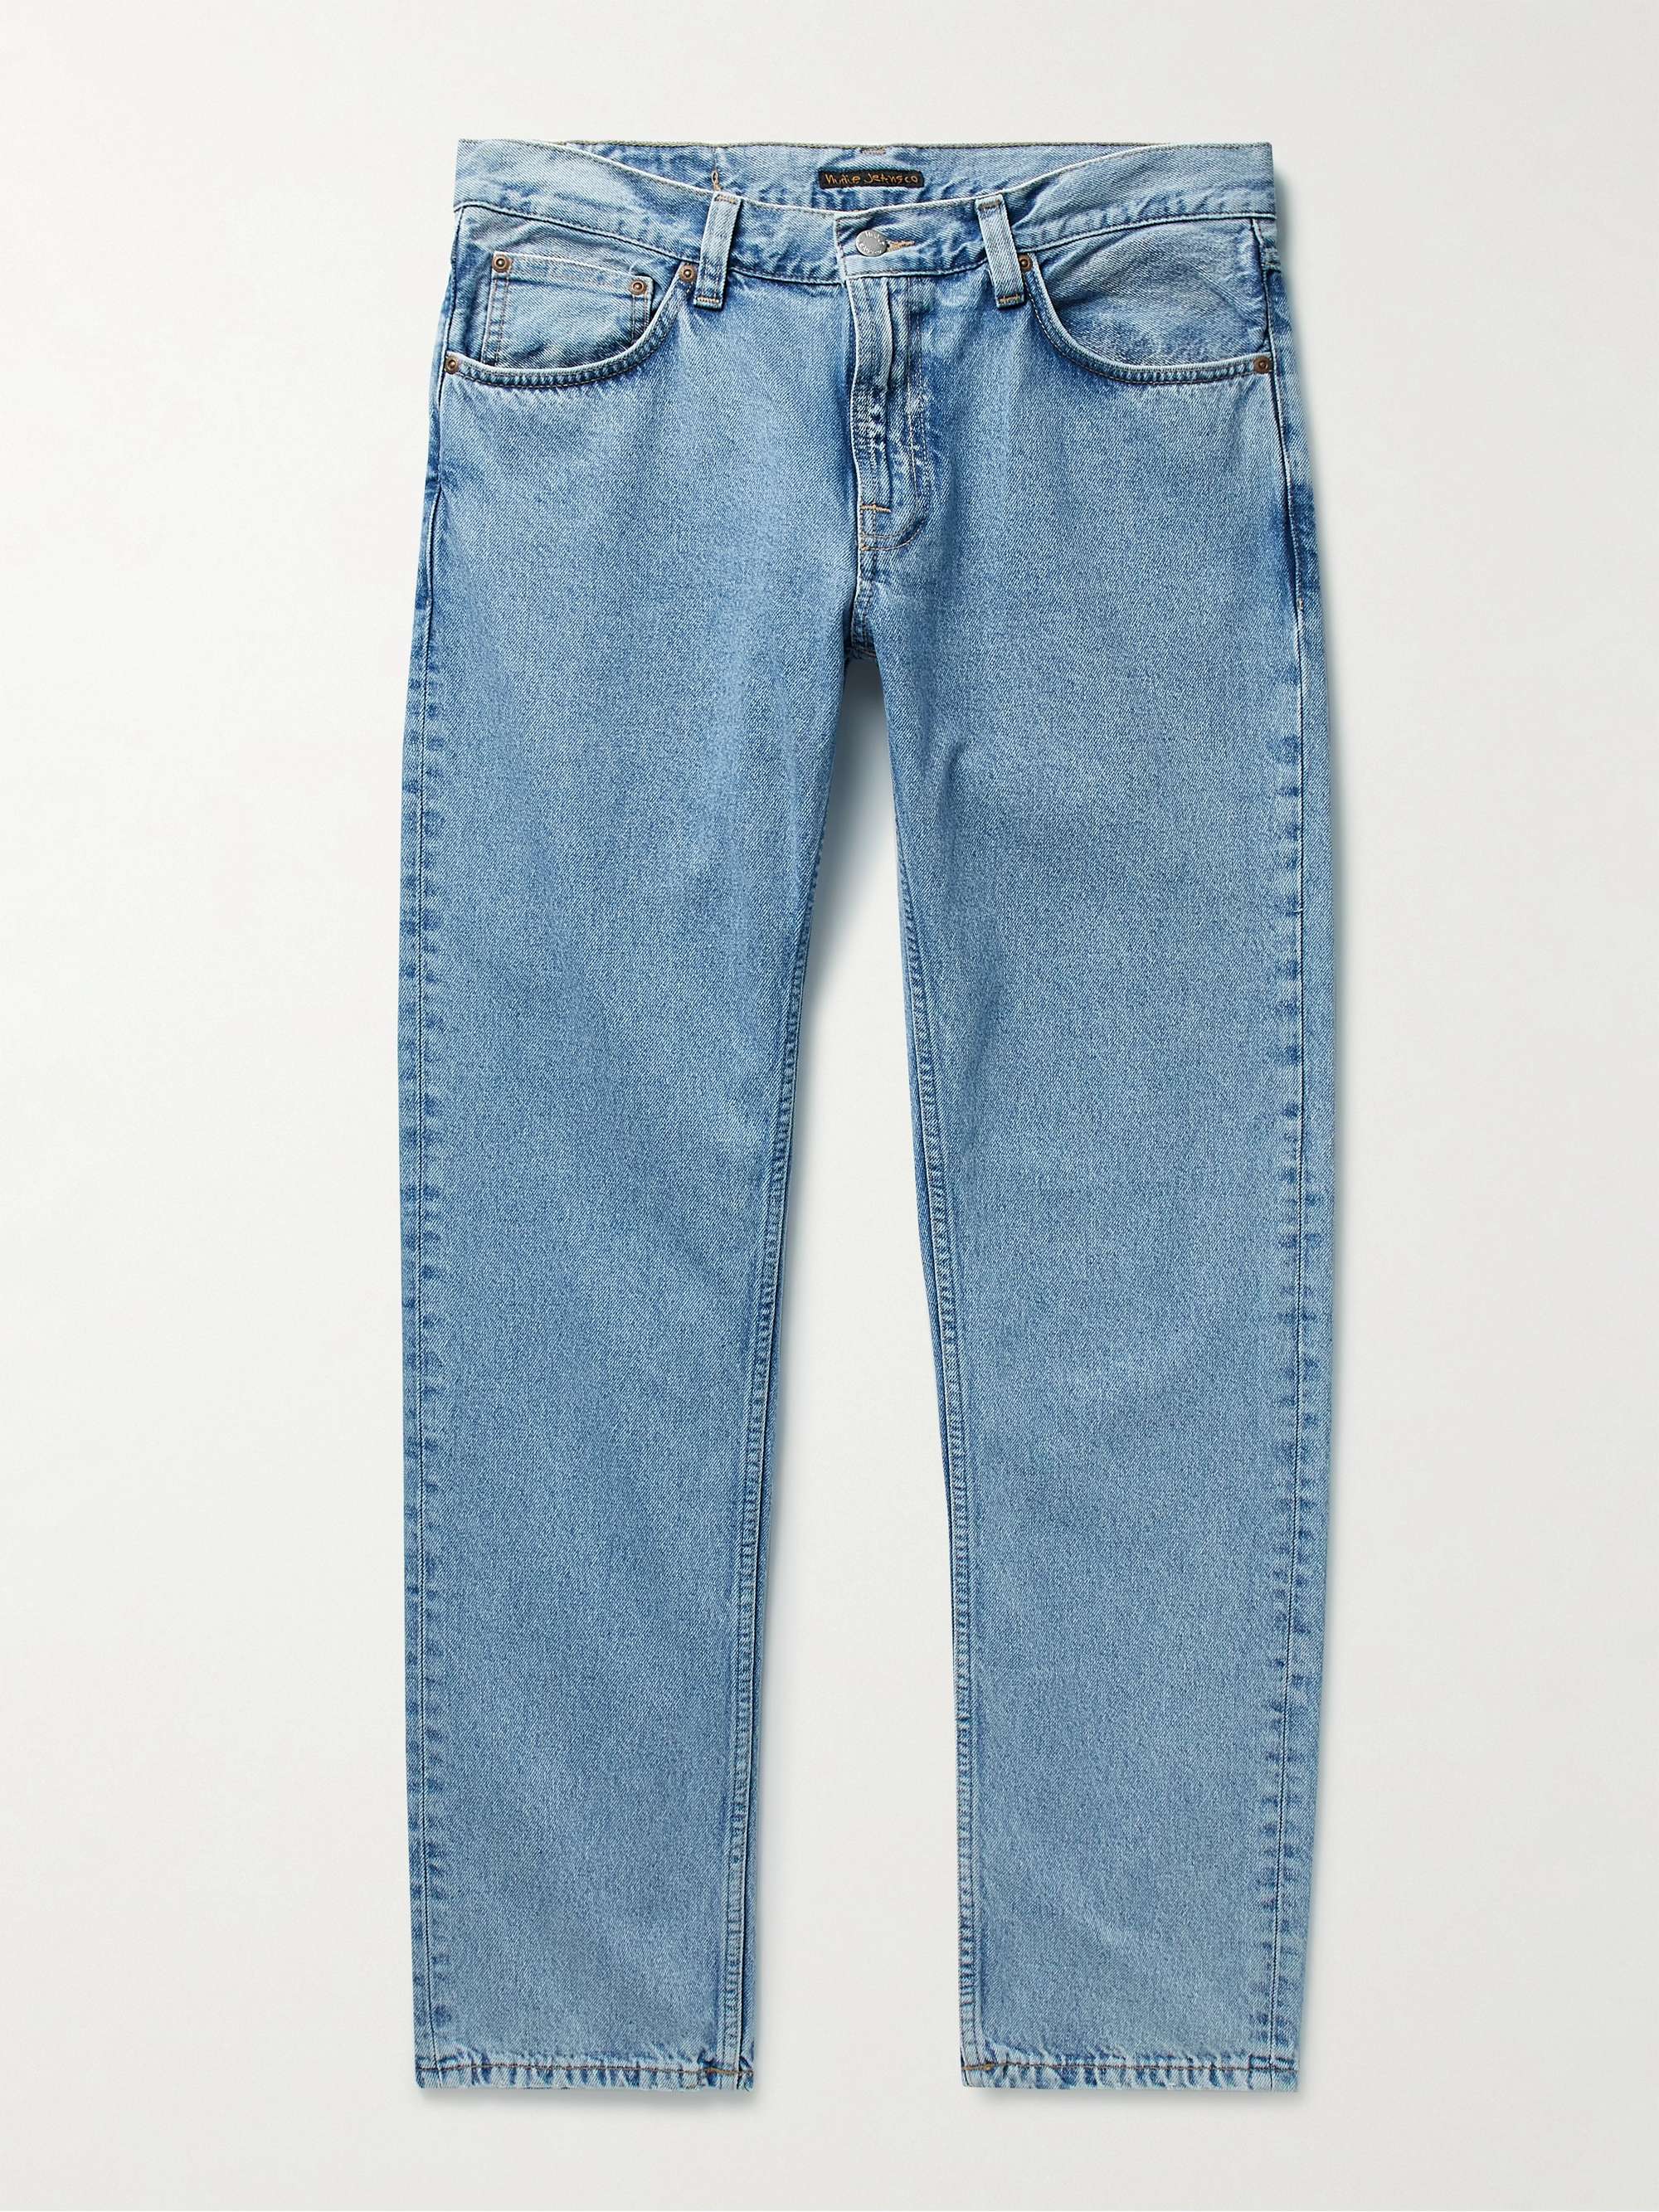 NUDIE JEANS Gritty Jackson Straight-Leg Jeans | MR PORTER